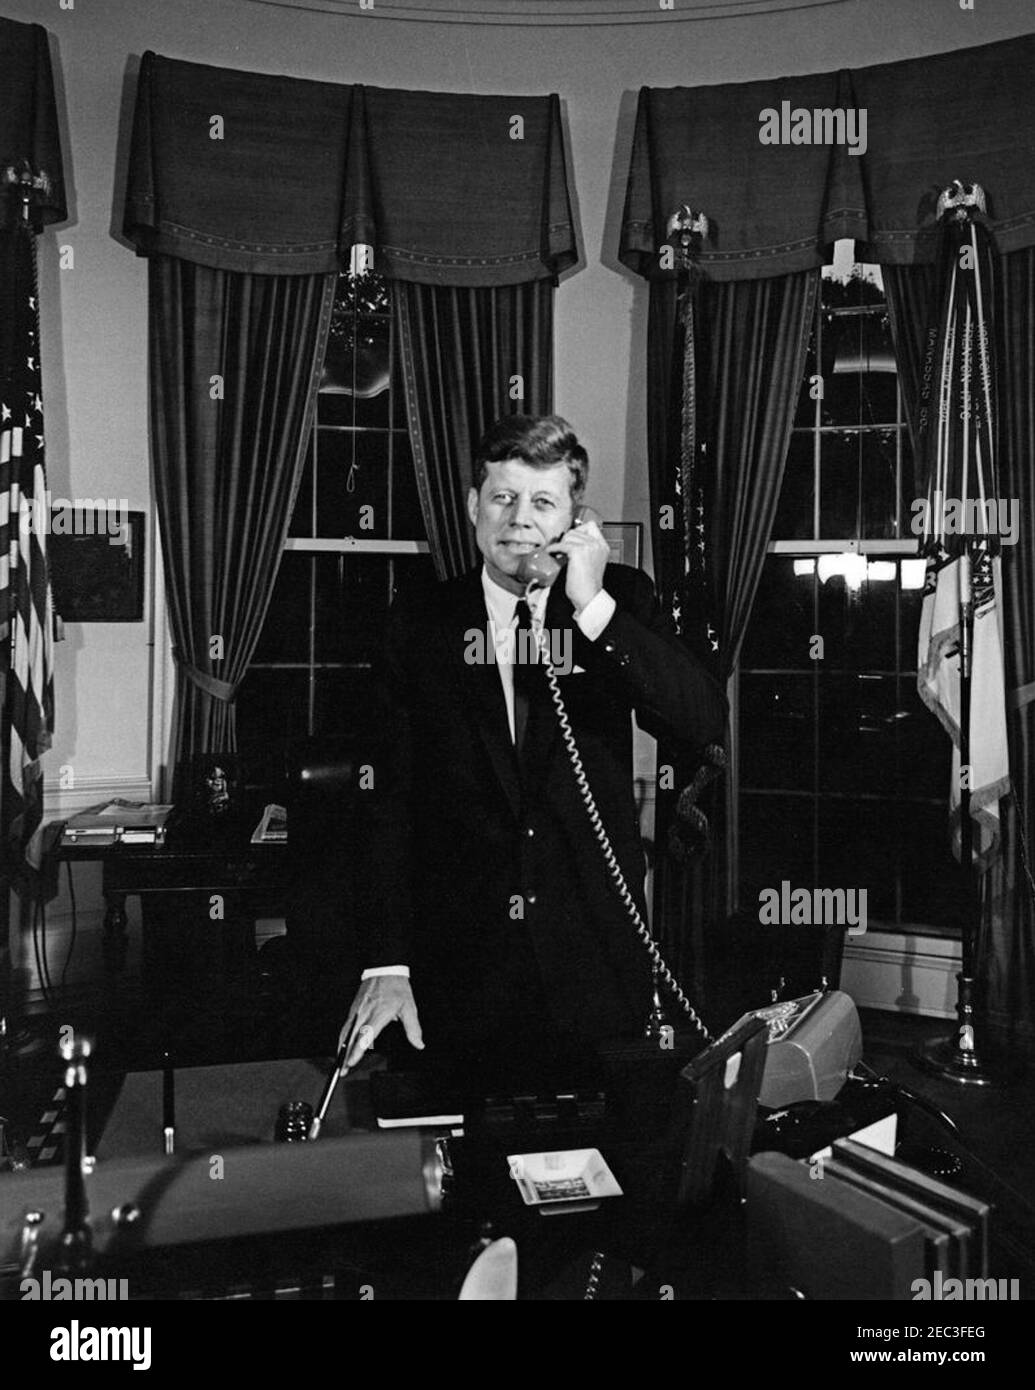 President Kennedy telephones Astronaut Gordon Cooper aboard USS Kearsarge (CVS-33), after recovery of u0022Faith 7u0022. President John F. Kennedy (standing at his desk) speaks on the telephone with astronaut, Major L. Gordon Cooper, following the successful completion of Major Cooperu0027s Mercury-Atlas 9 orbital flight, as part of the final manned space mission of the National Aeronautics and Space Administrationu0027s (NASA) Project Mercury program. Major Cooper was aboard the USS Kearsarge (CVS-33) after splashdown and recovery of the Mercury capsule (also known as Faith 7) in the Paci Stock Photo